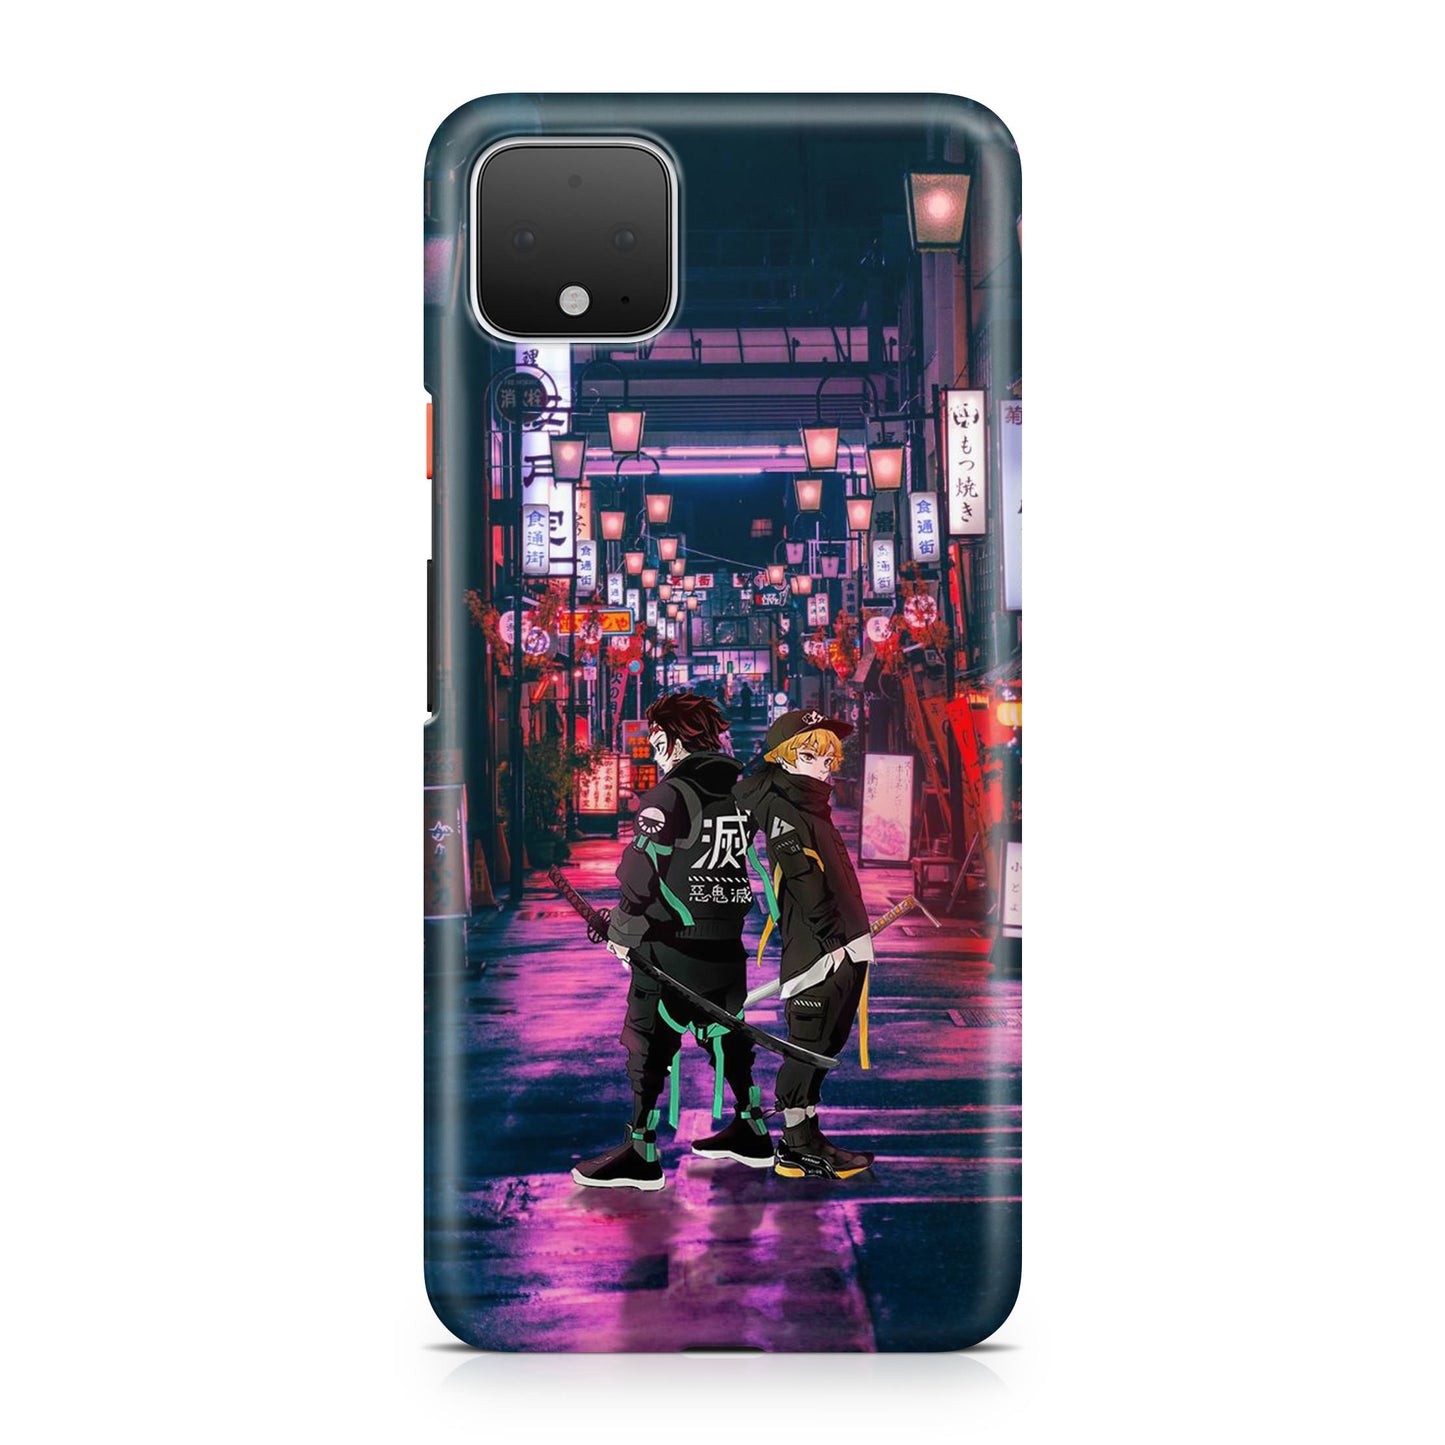 Tanjir0 And Zenittsu in Style Google Pixel 4 / 4a / 4 XL Case